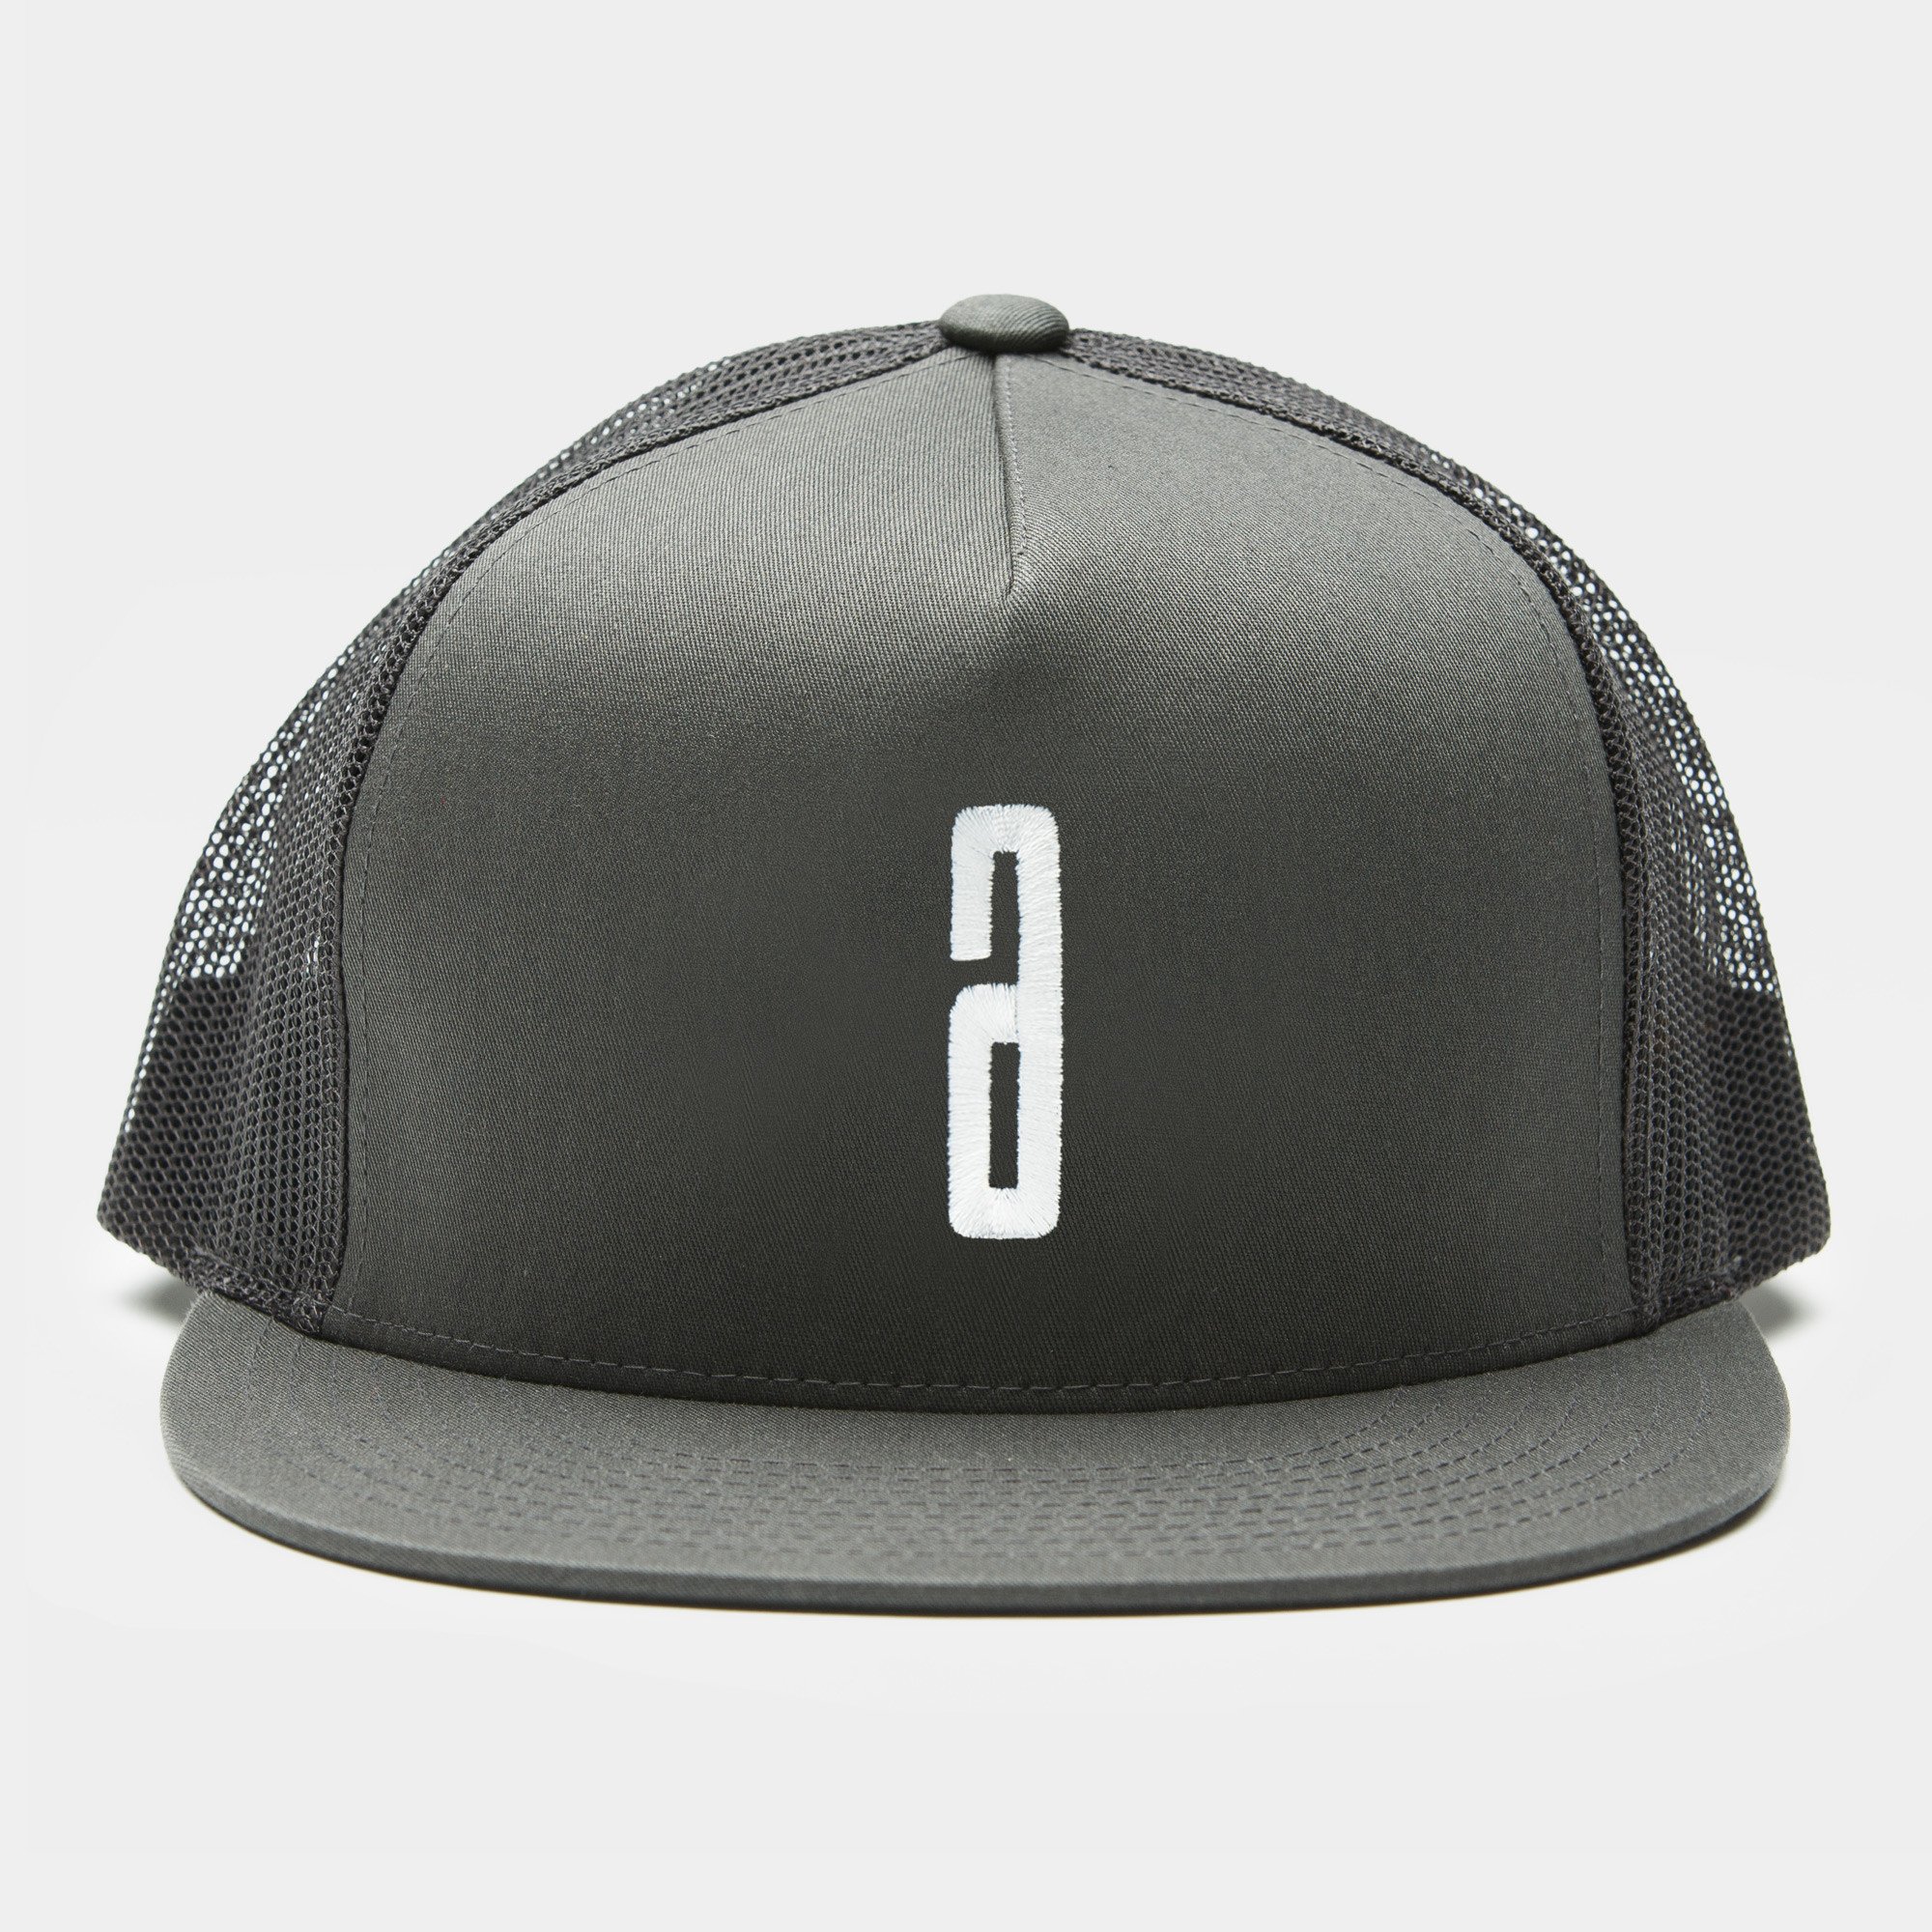 Trucker Cap Embroidery A  - Grey / White